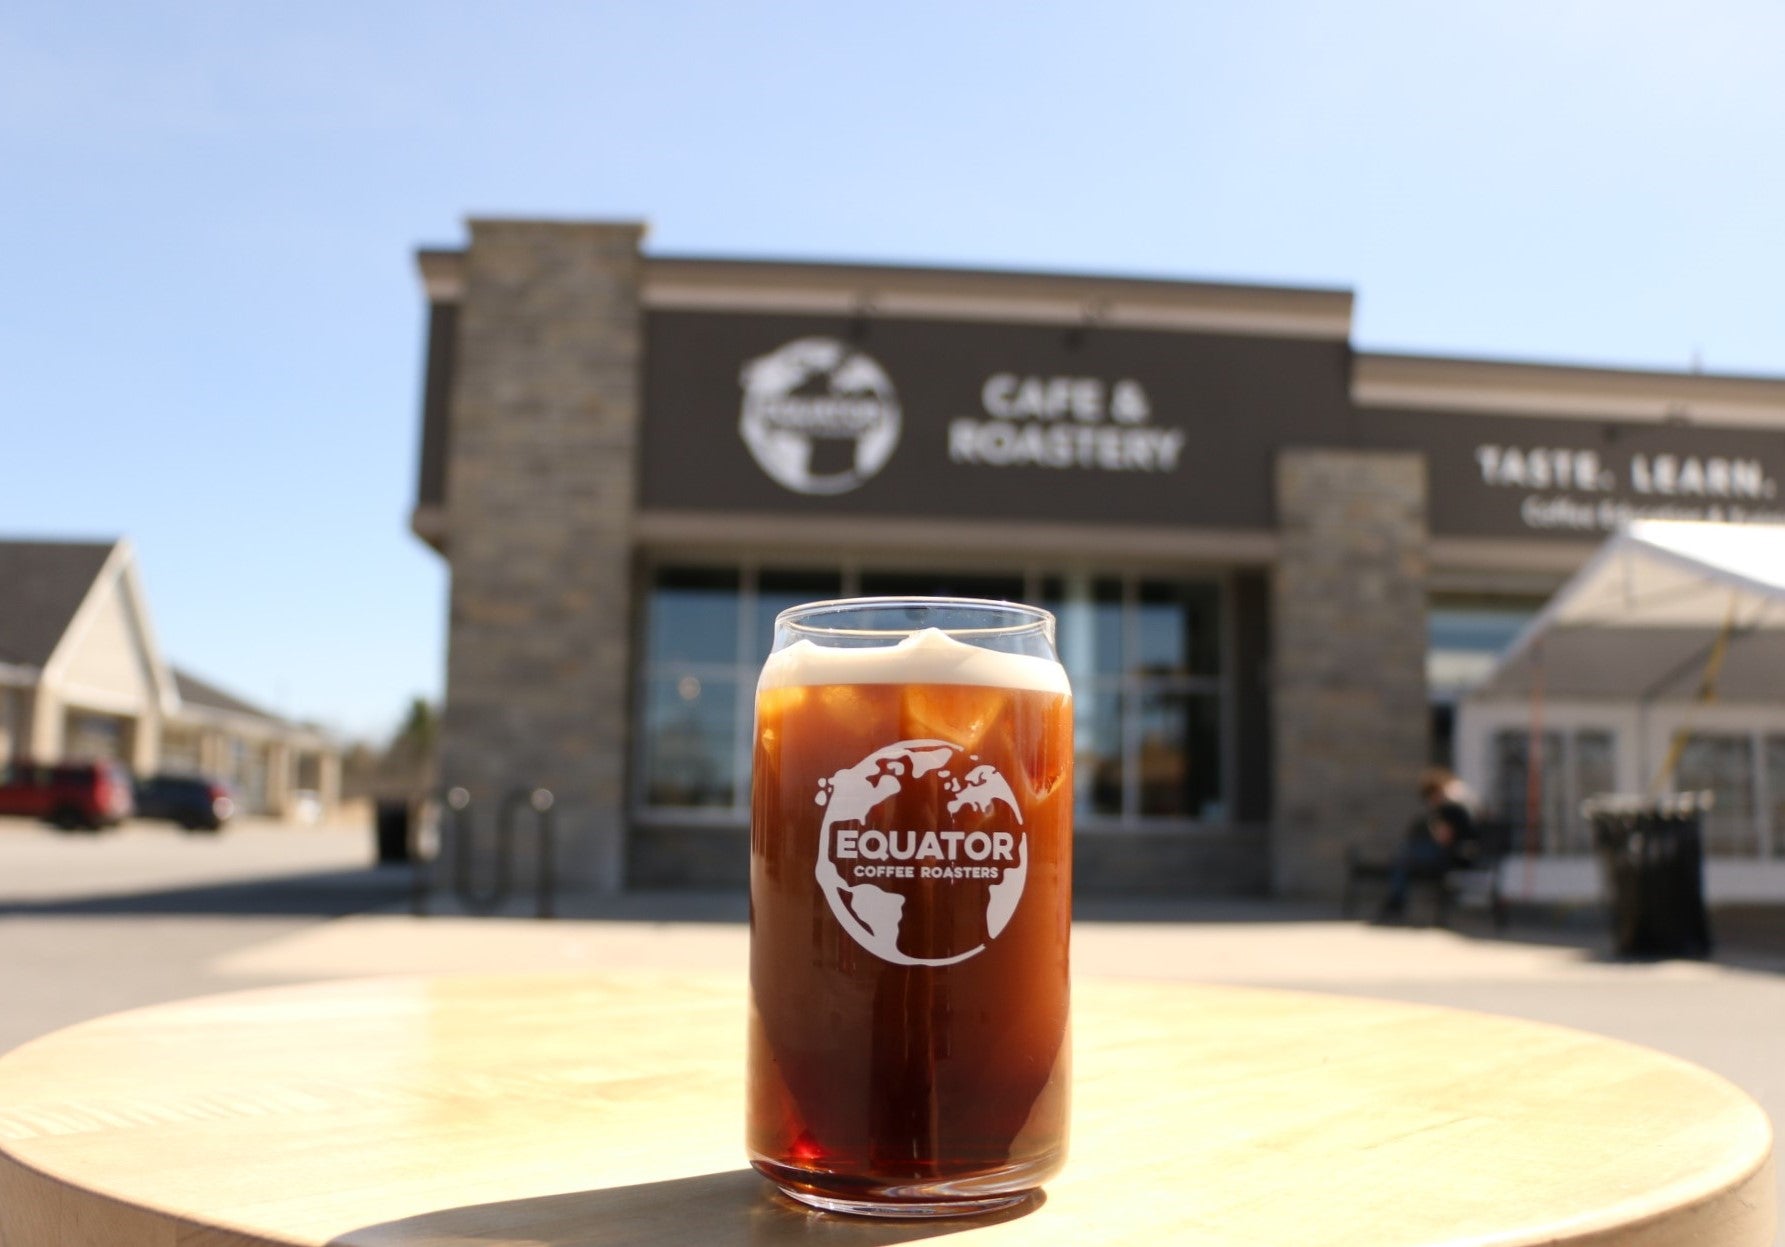 An Equator glass with nitro cold brew and ice in it on a table in the sun.